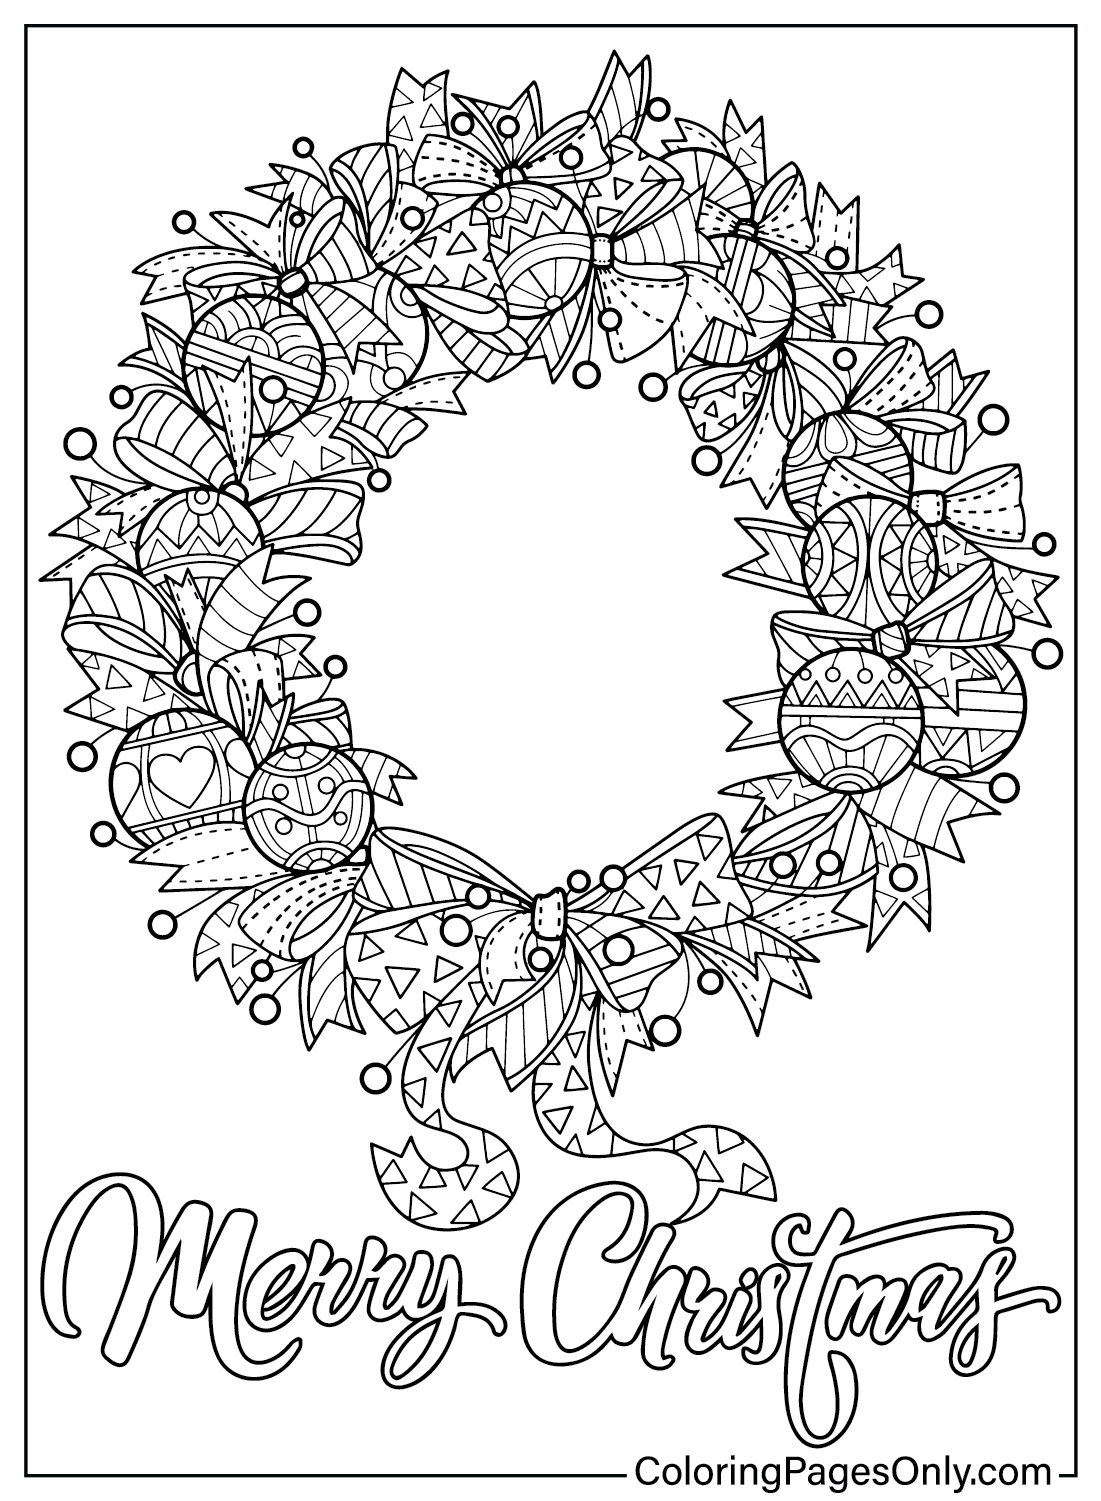 Christmas Wreath Coloring Page to Print from Christmas Wreath